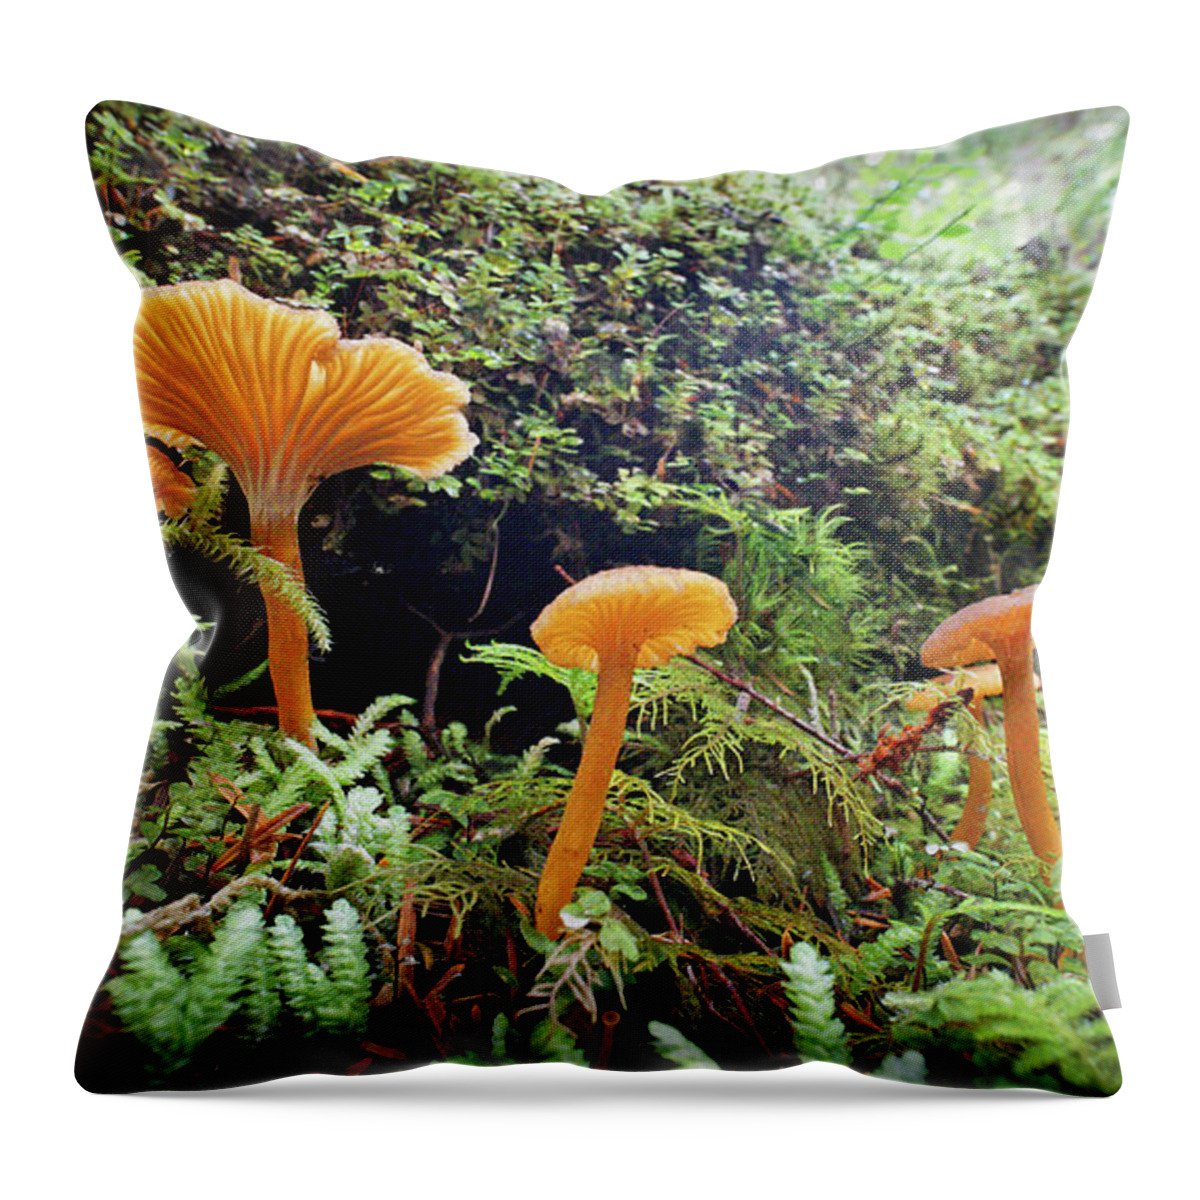 Earth Throw Pillow featuring the photograph Forest Fungi by Martin Konopacki